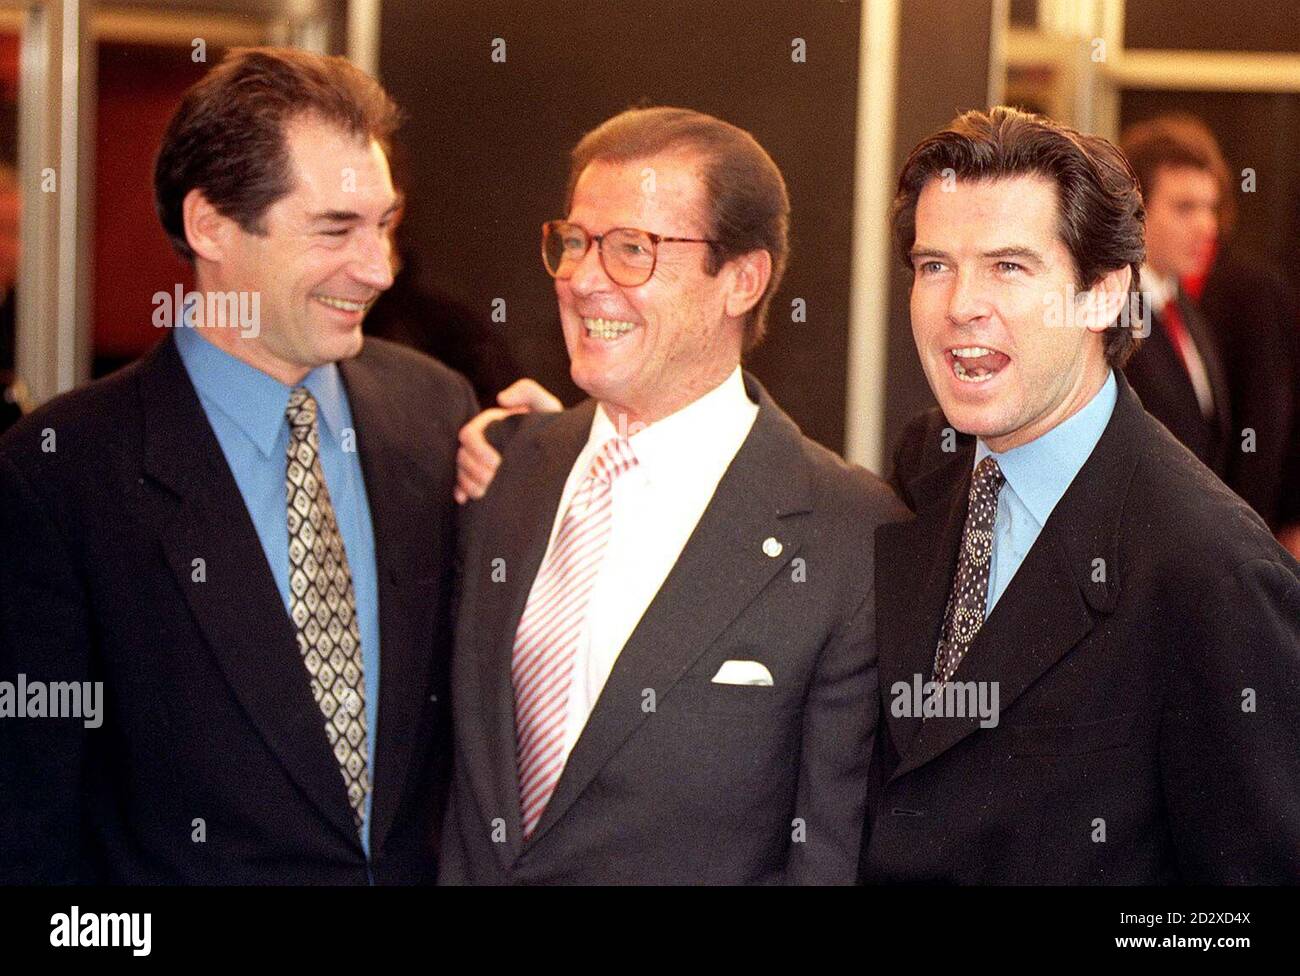 James Bond actors (from left) Timothy Dalton, Roger Moore and Pierce Brosnan arrive for today's (Sunday) memorial service for film producer Albert 'Cubby' Broccoli, at the Odeon, Leicester Square. Photo by Fiona Hanson/PA Stock Photo